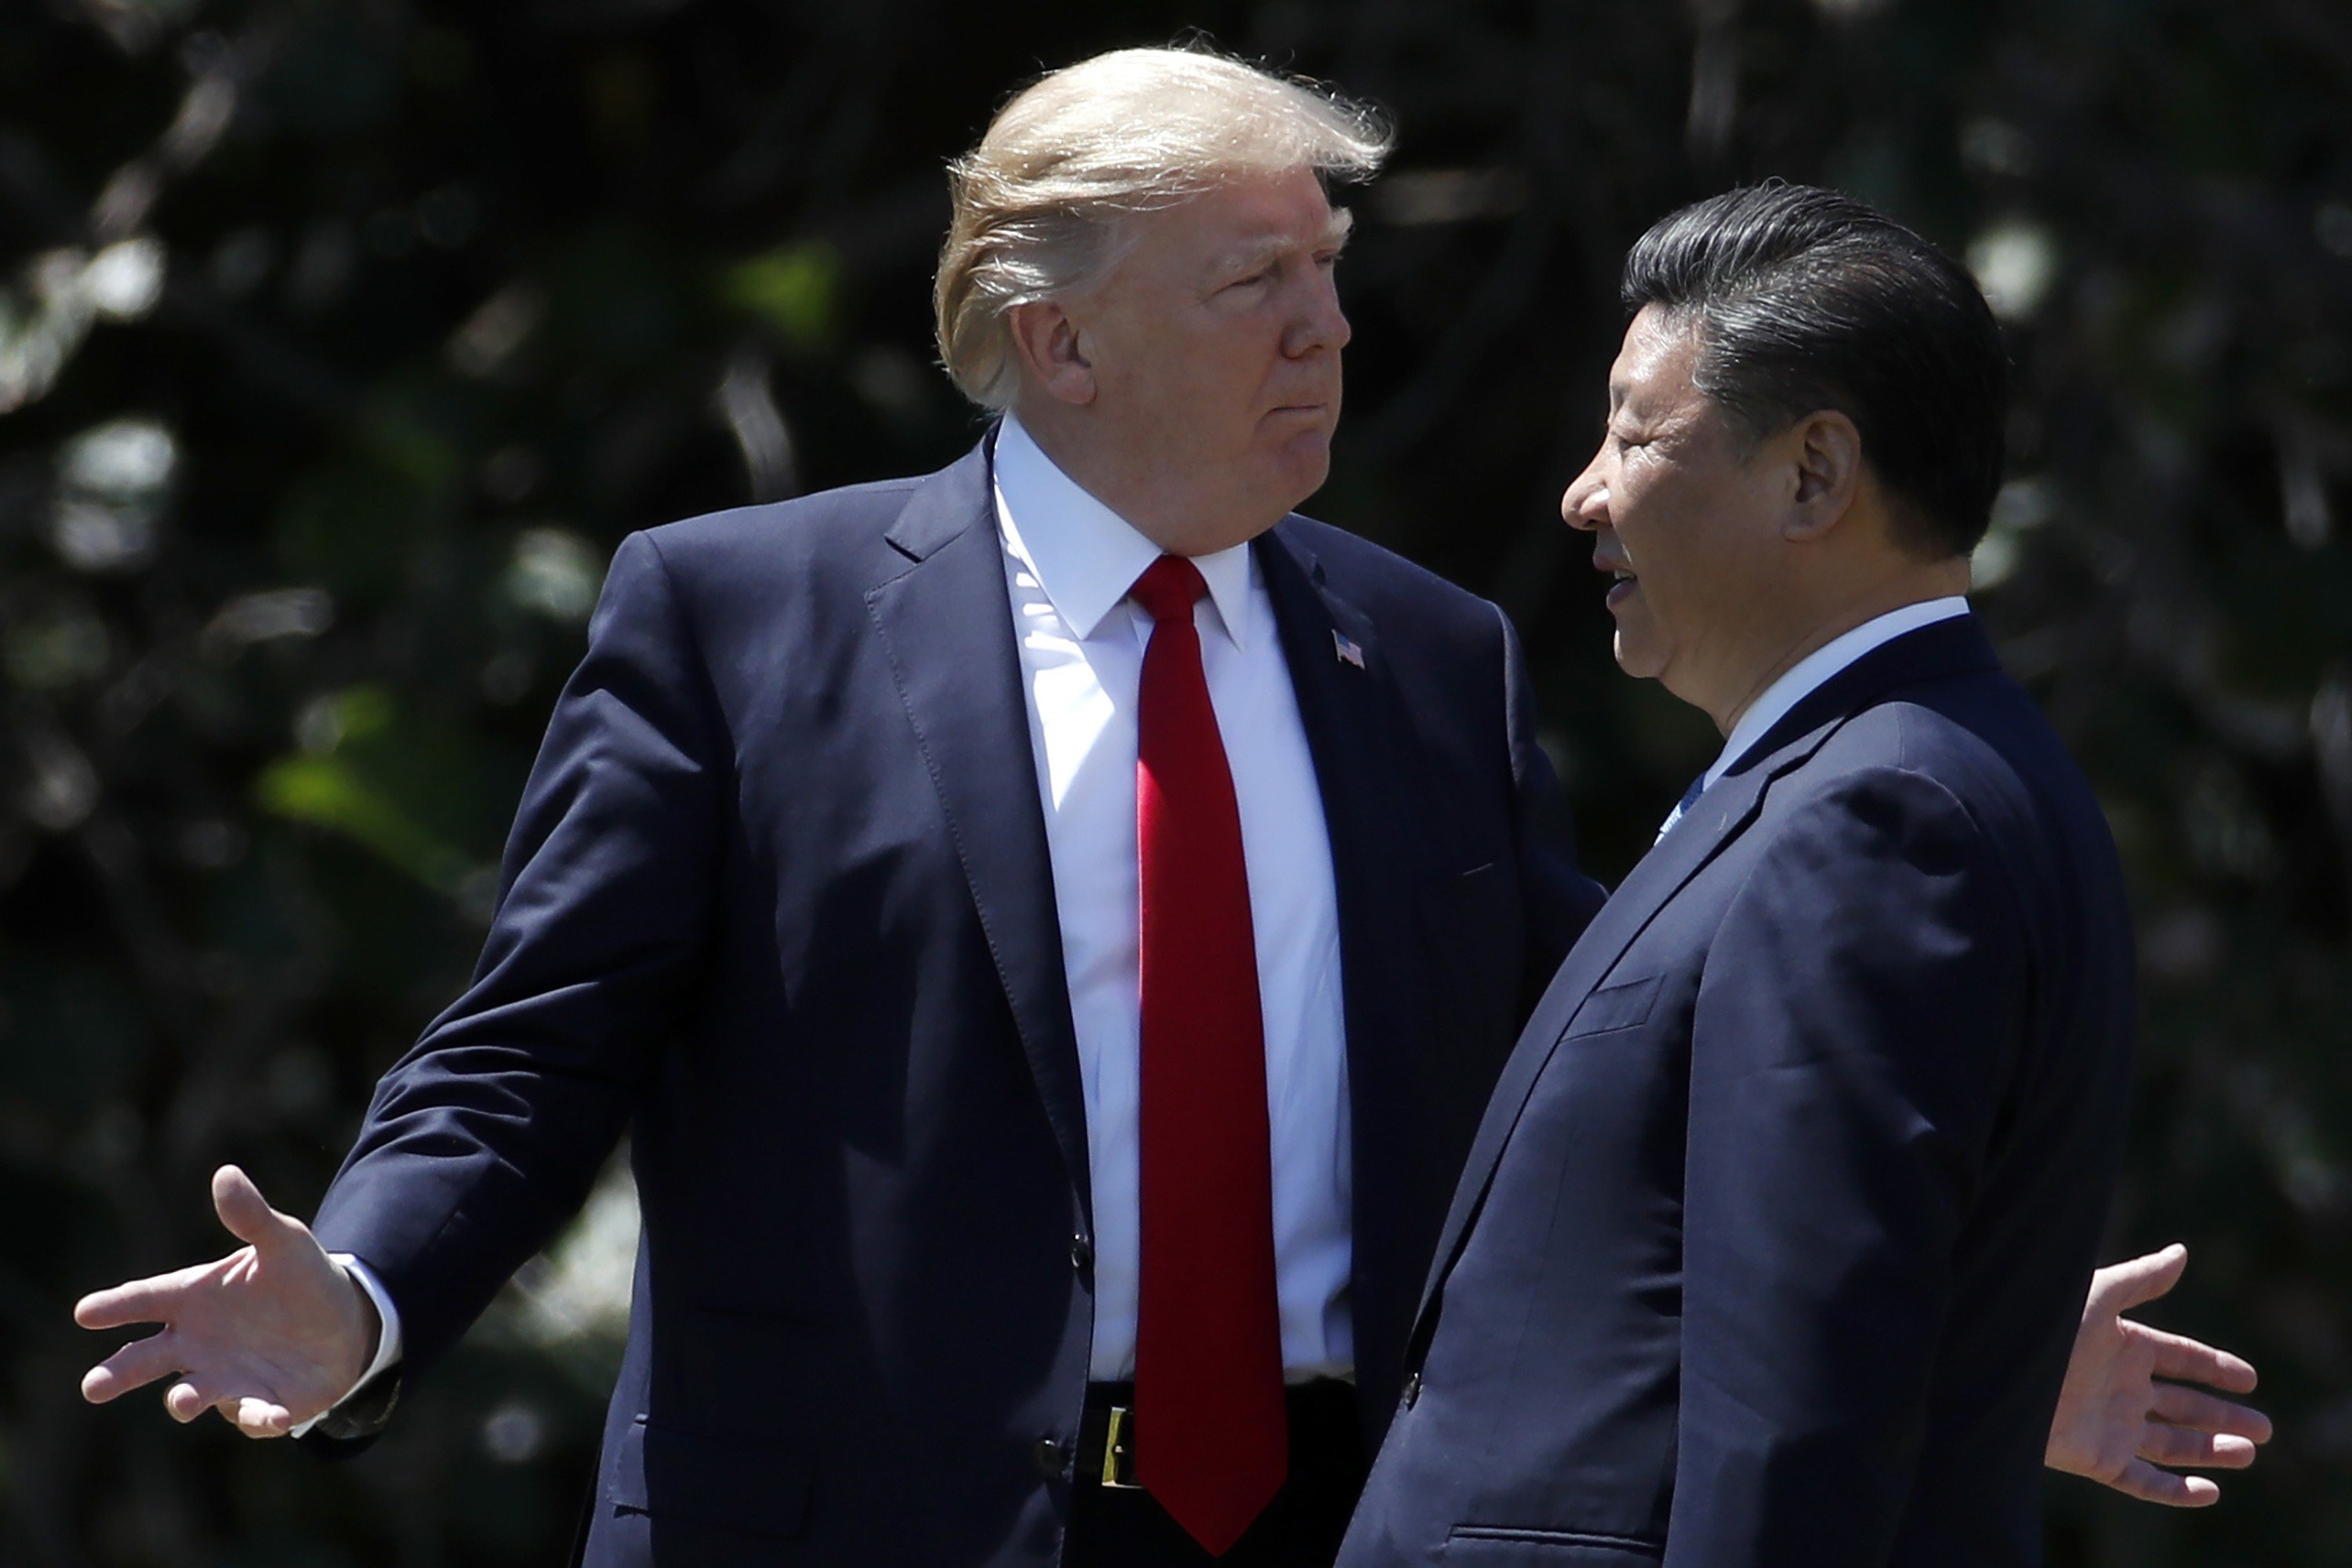 US President Donald Trump walks with Chinese President Xi Jinping at Mar-a-Lago in Palm Beach, Florida, in April 2017. Trump’s administration has challenged China, most notably through the trade war, but the need to keep the US economy strong in an election year may push him to let up. Photo: AP